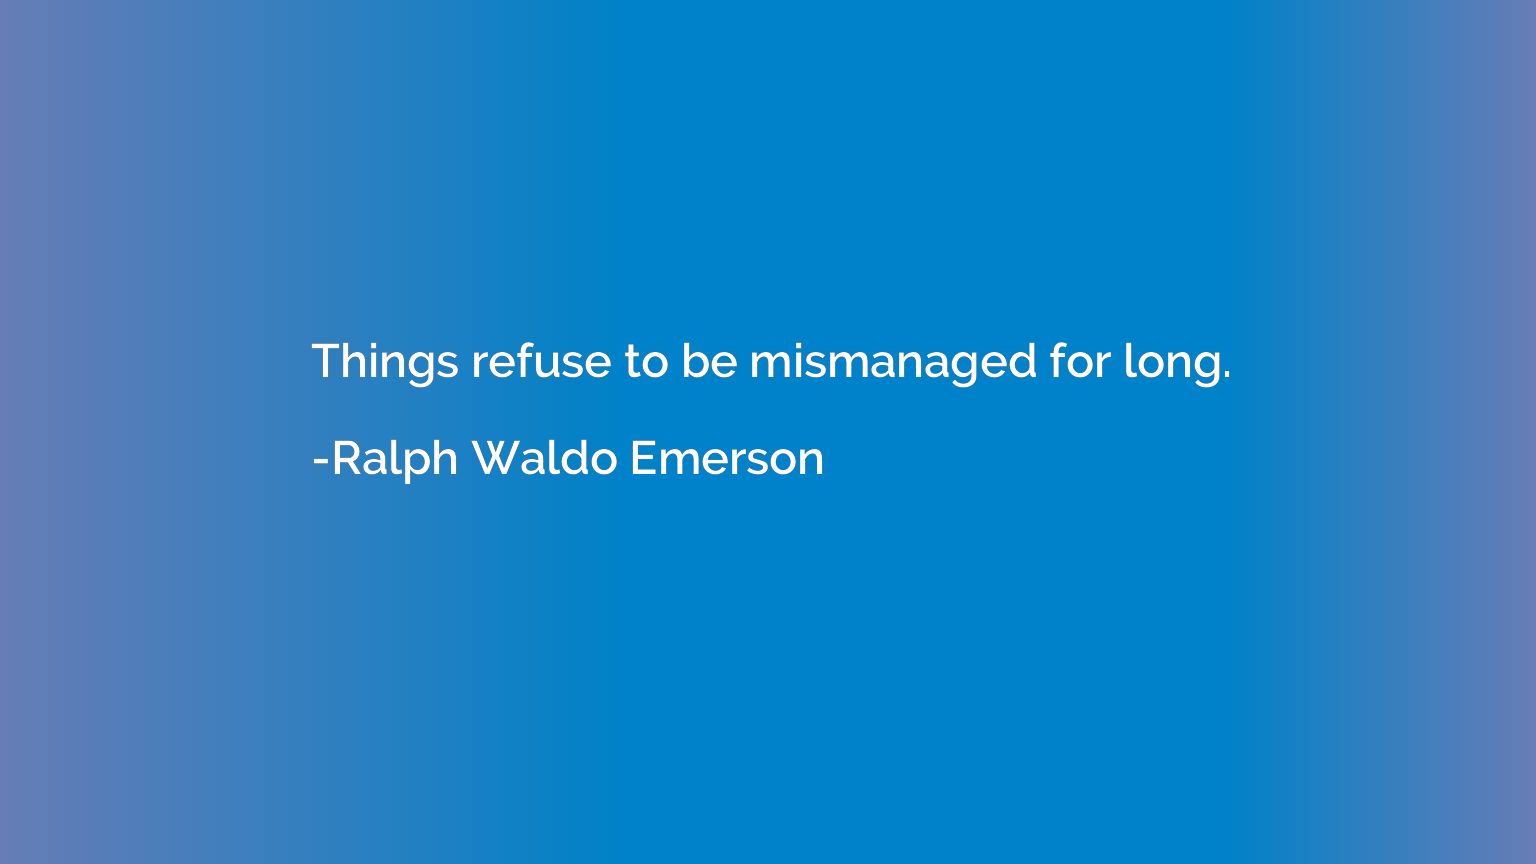 Things refuse to be mismanaged for long.